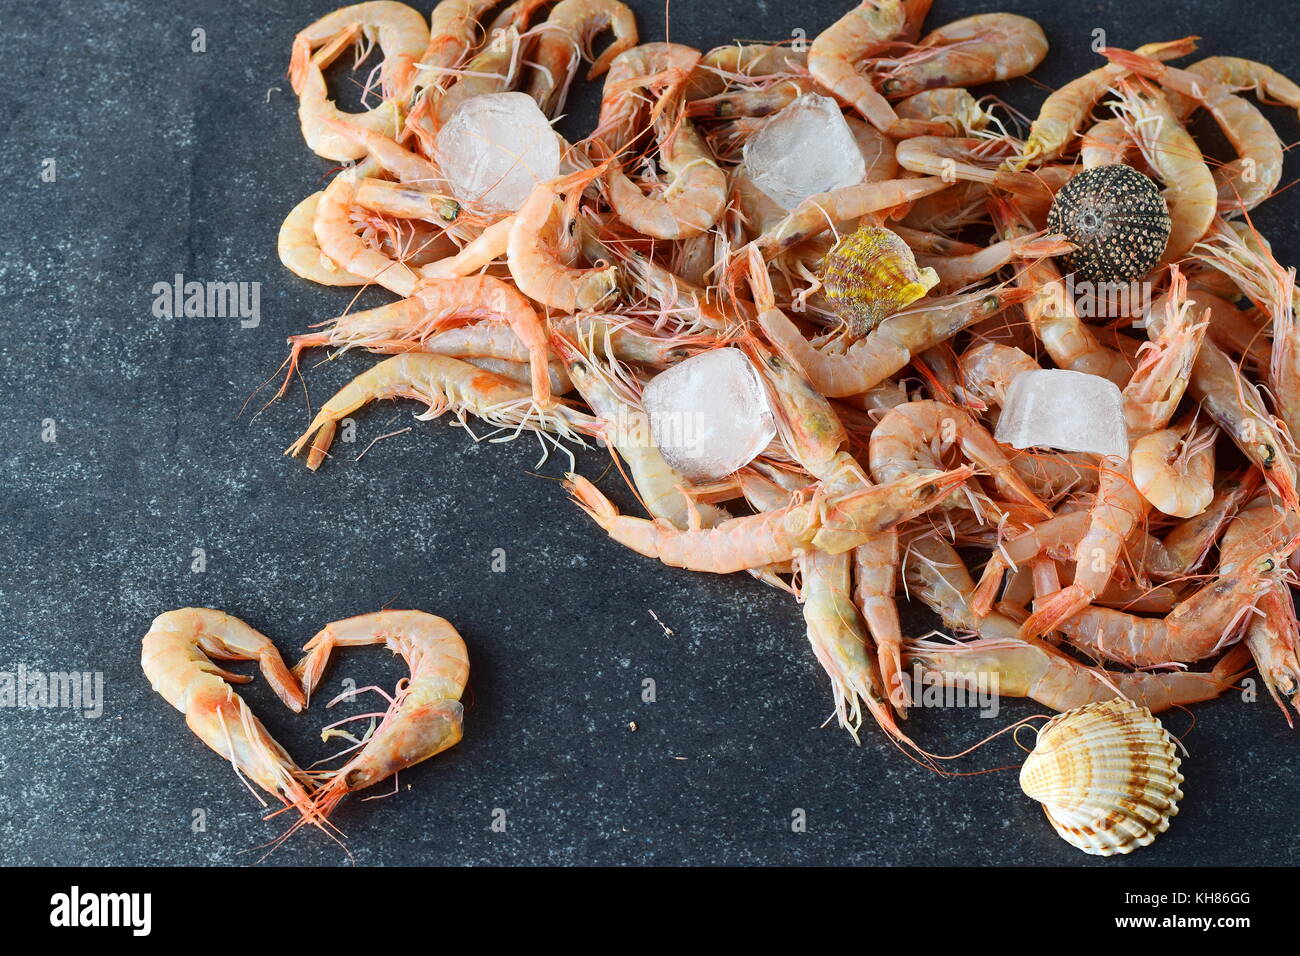 Raw local shrimps with ice cubes on a grey abstract background. Stock Photo